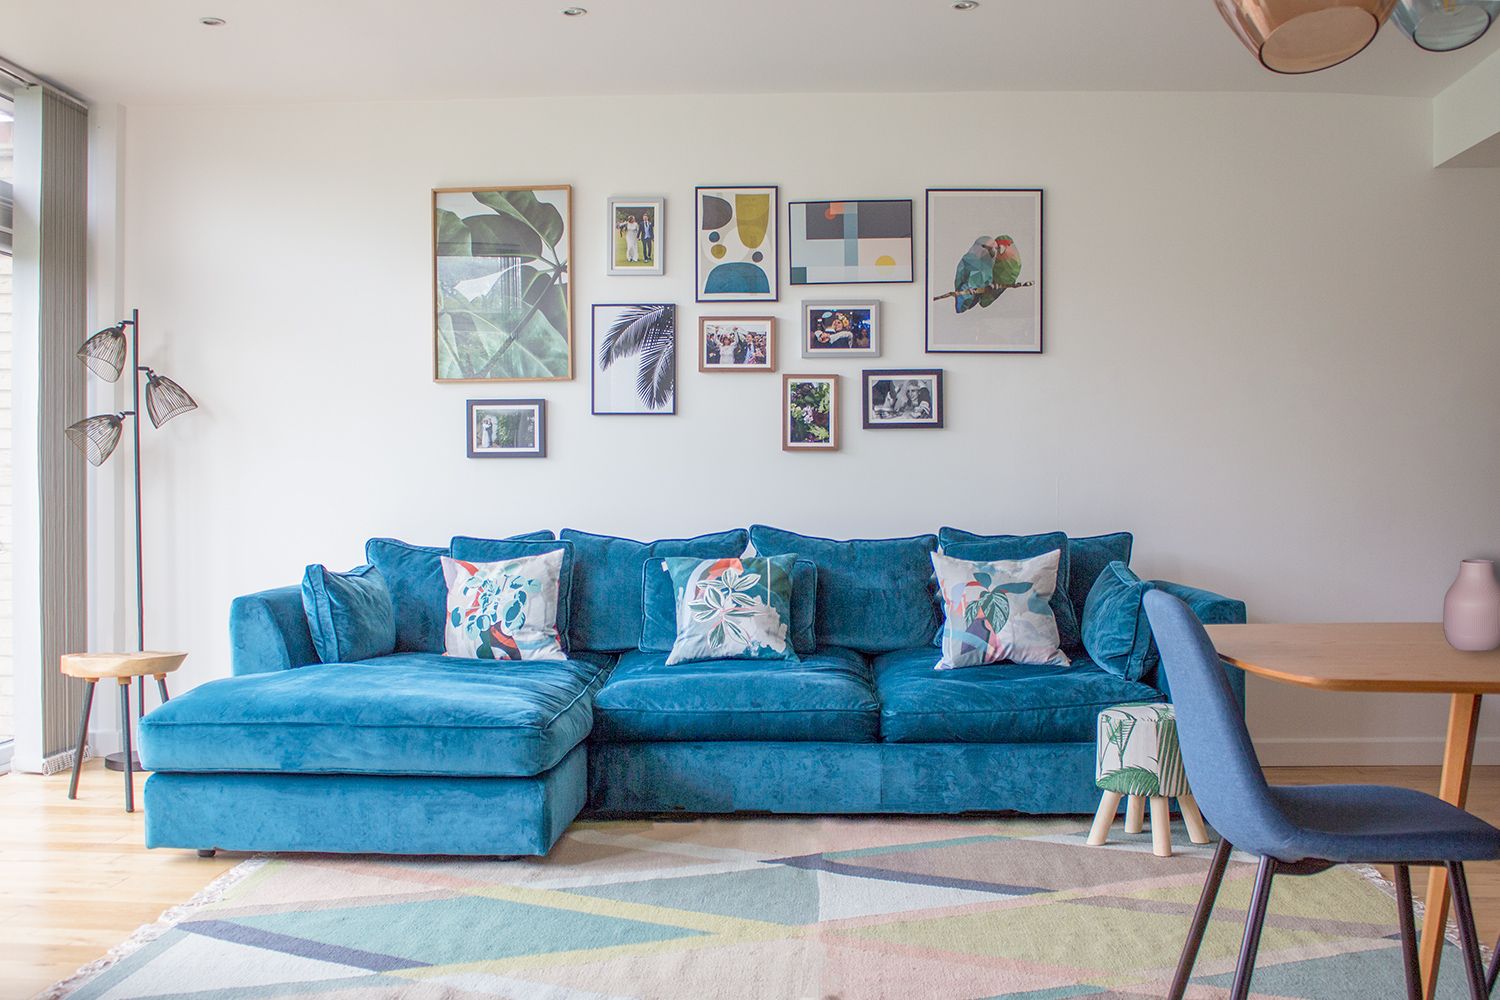 A photo of a teal velvet sofa in a room painted off white and on a colourful geometric rug.